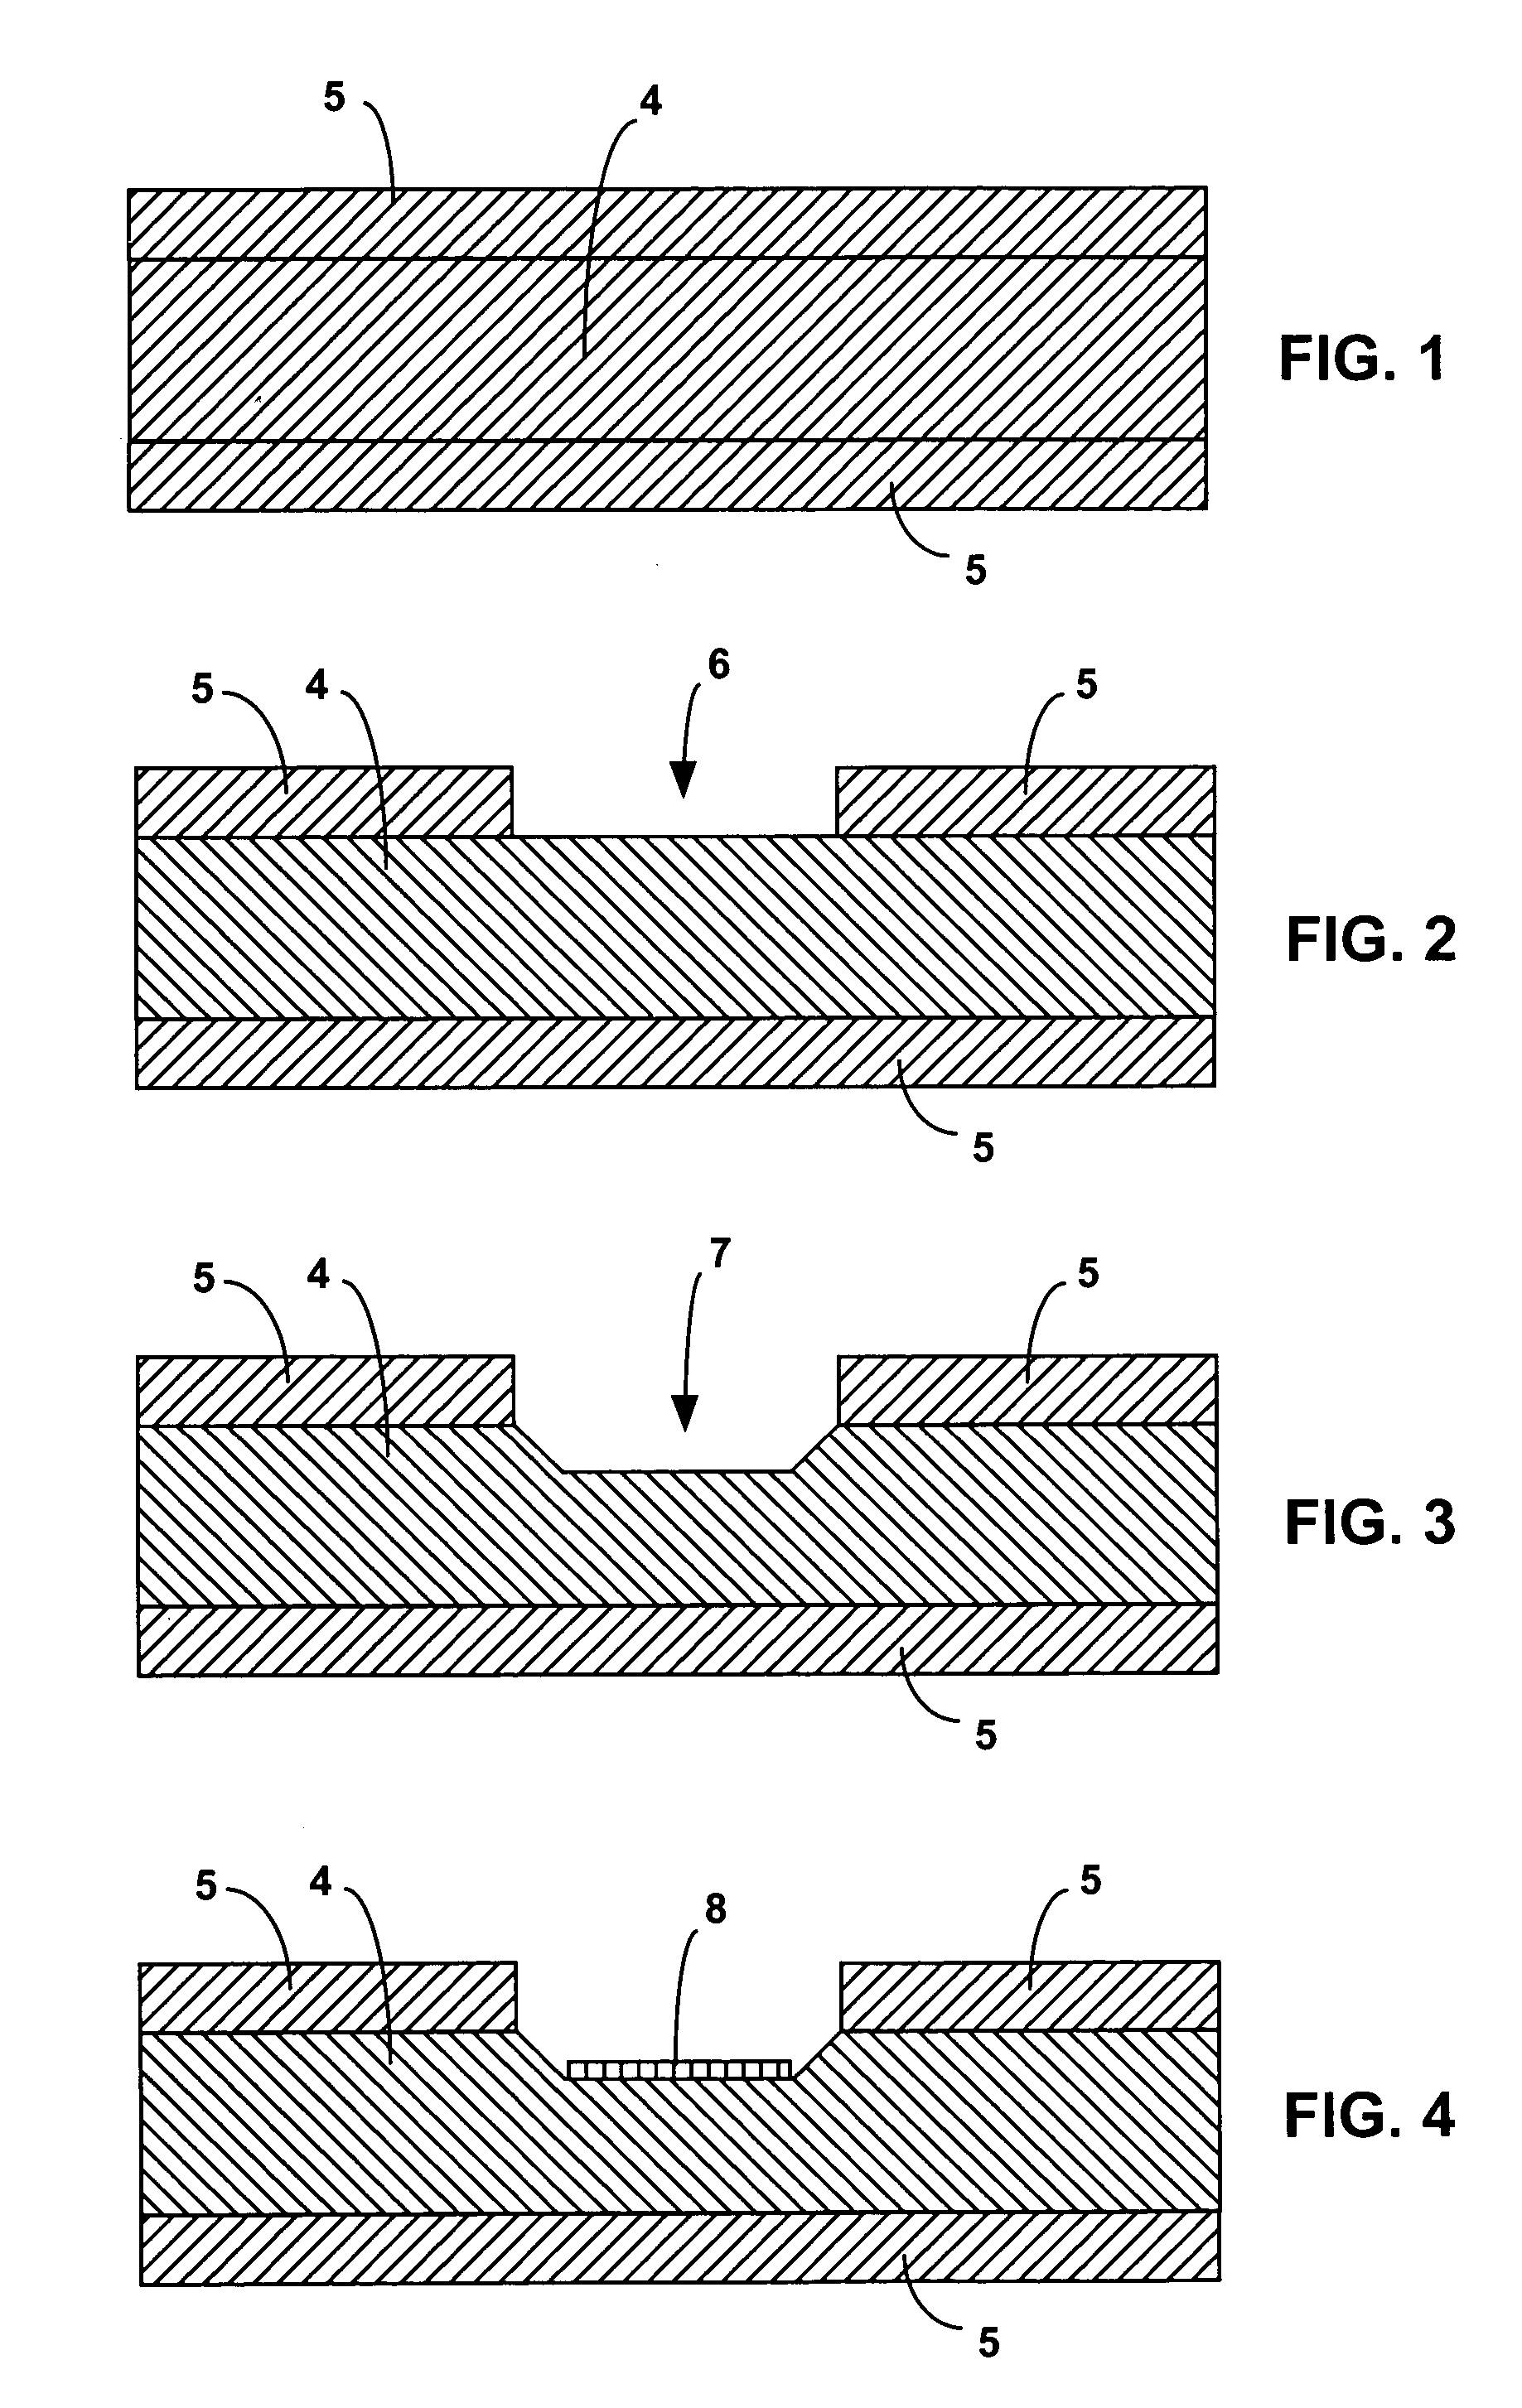 Process for fabricating monolithic membrane substrate structures with well-controlled air gaps